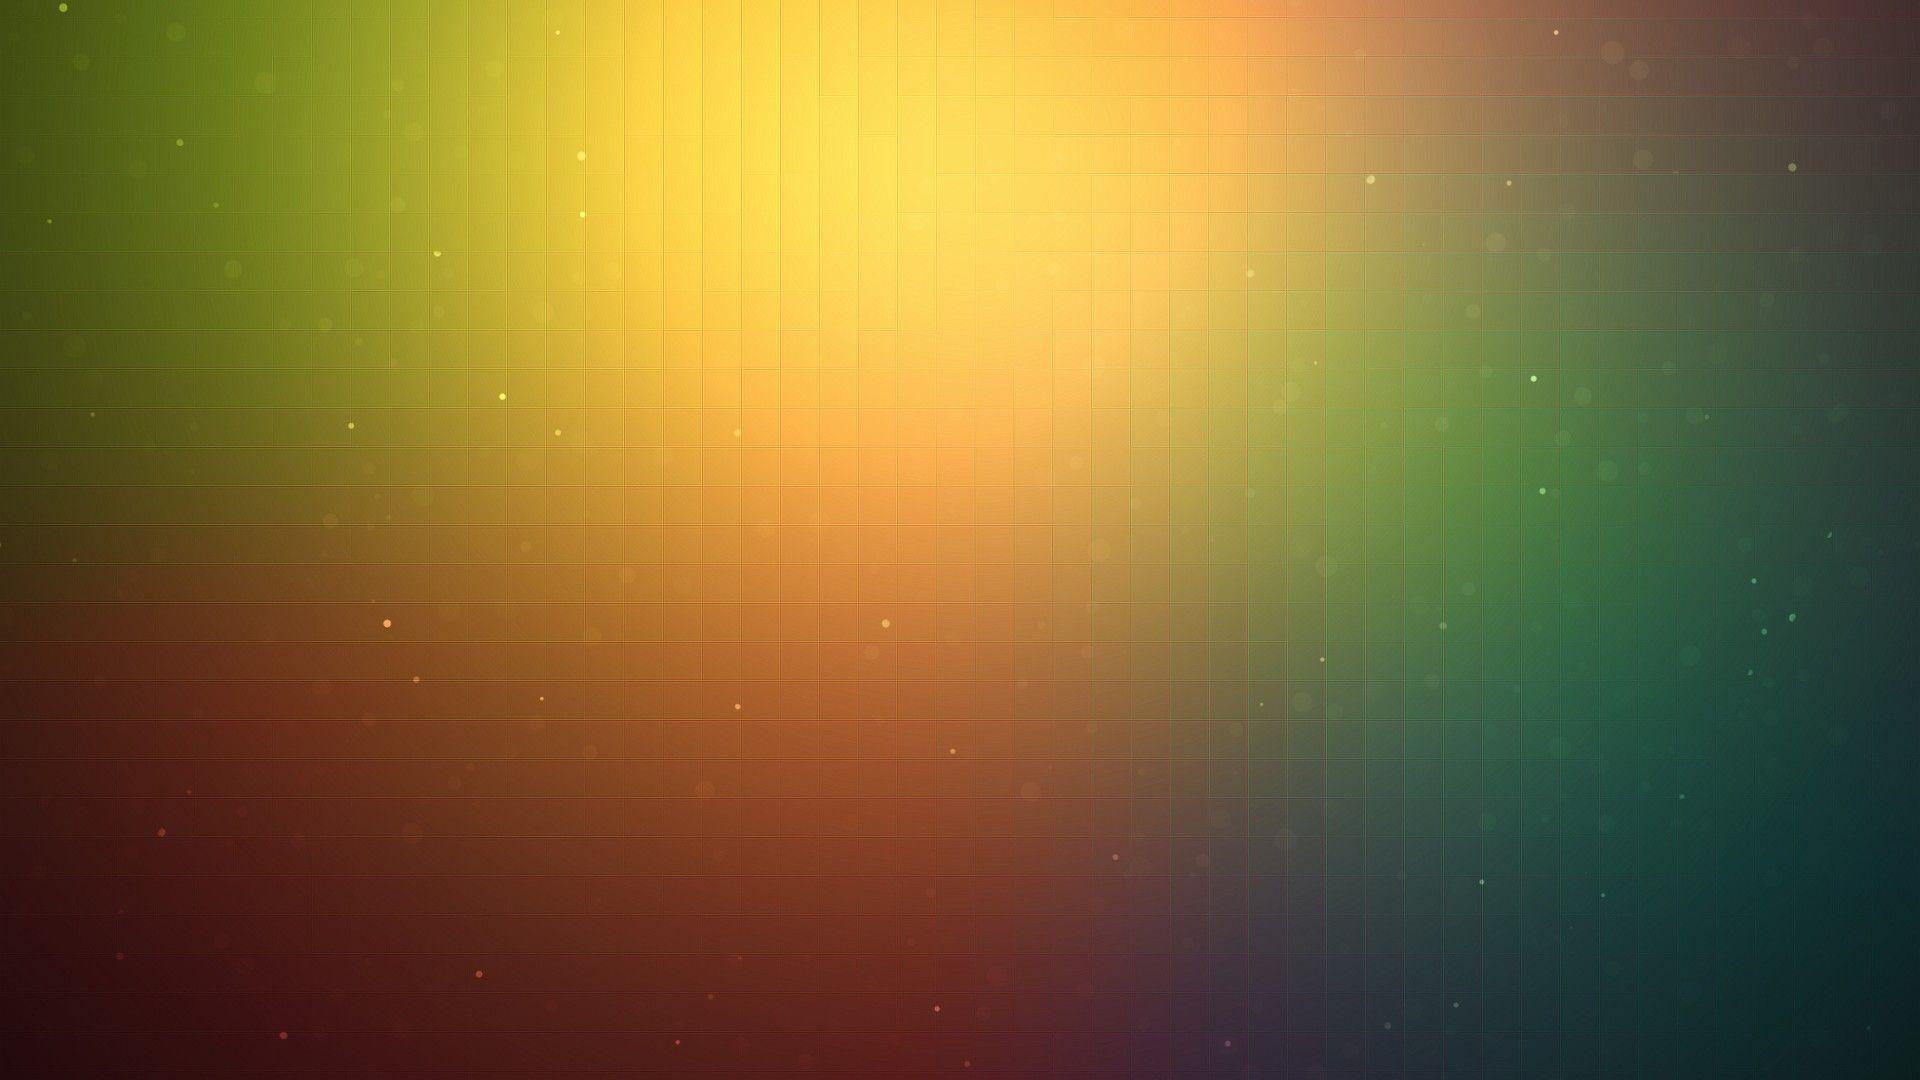 Plain Color Background Images Download - You can play around with our